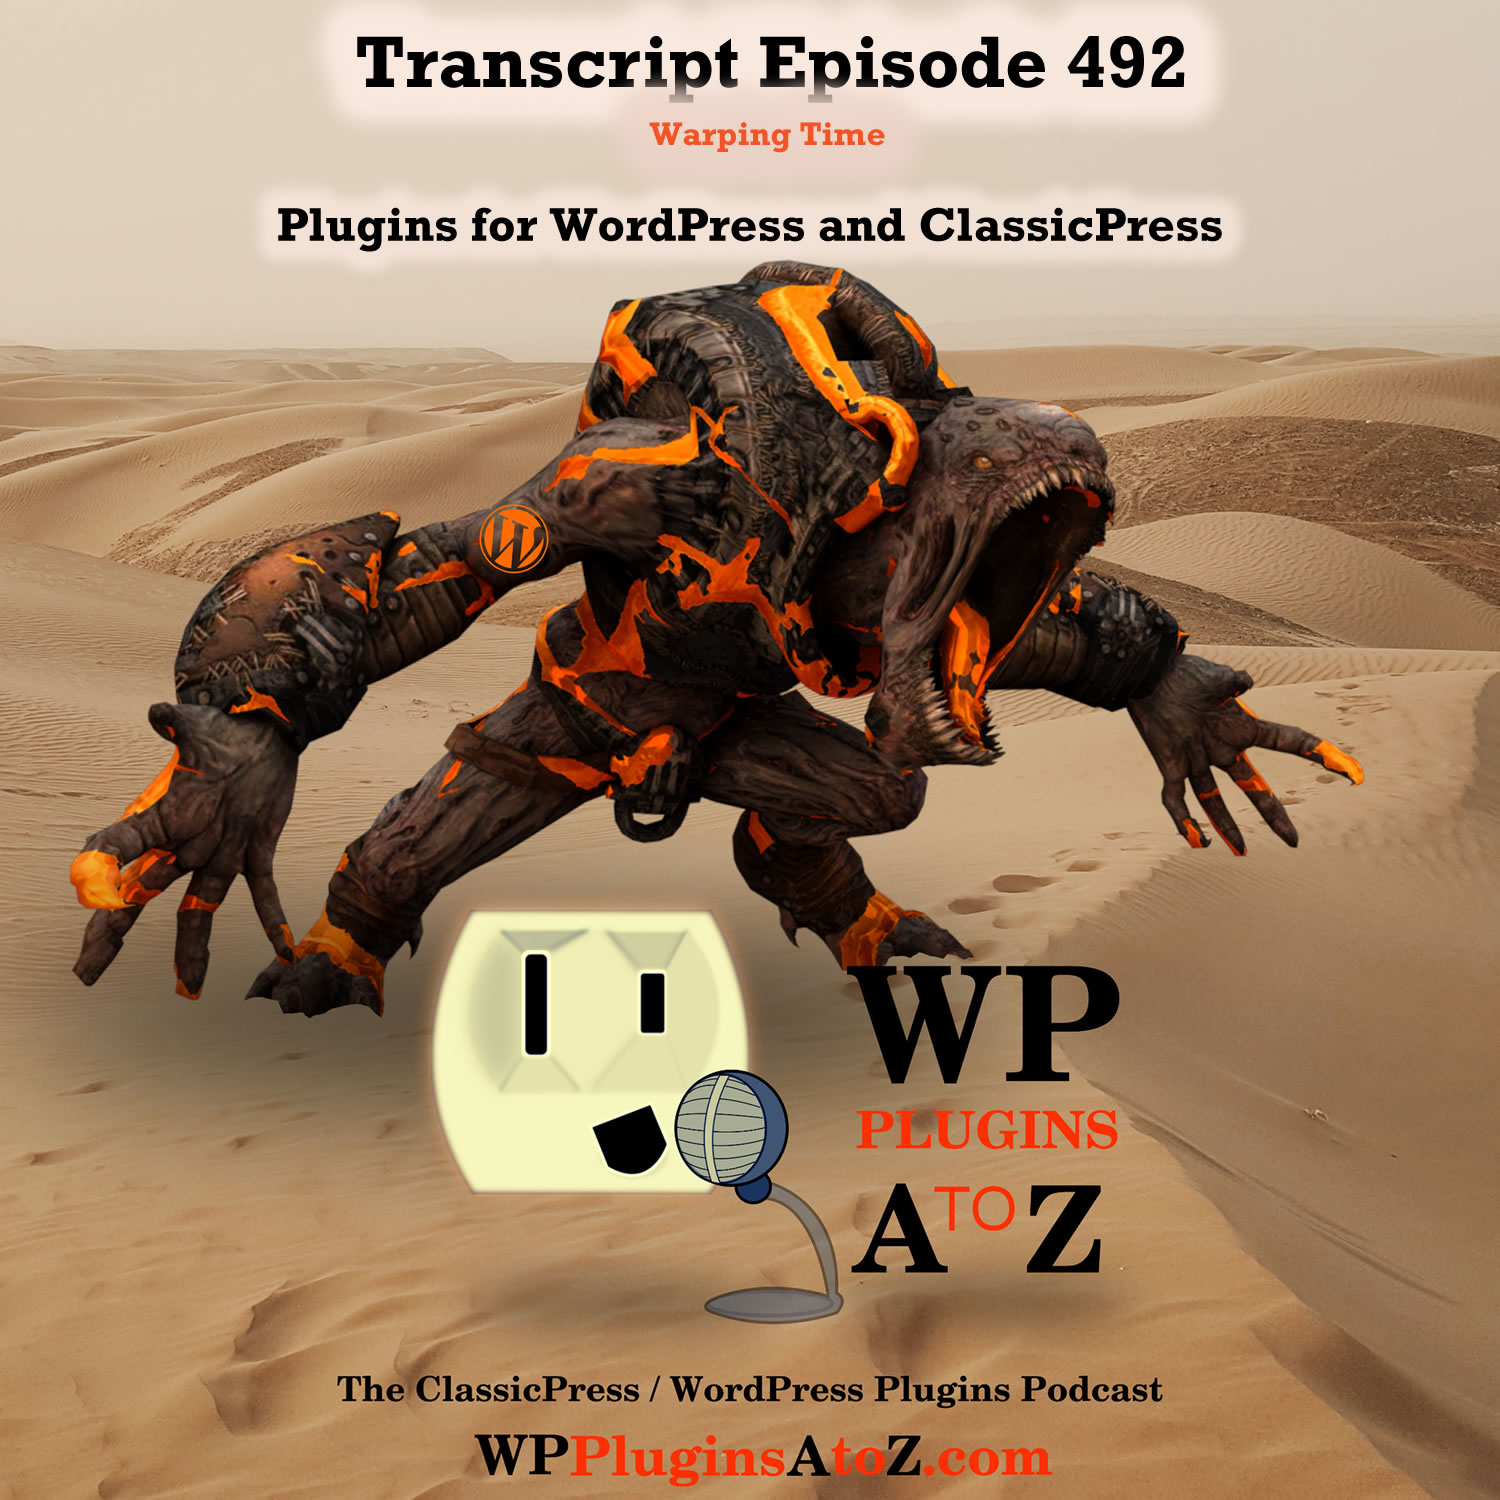 It’s Episode 492 so grab your Rum and Coke we have plugins for Arts & Crafts,Tracking Time, Stopping Spammers, Time Traveling …, and ClassicPress Options. It’s all coming up on WordPress Plugins A-Z!